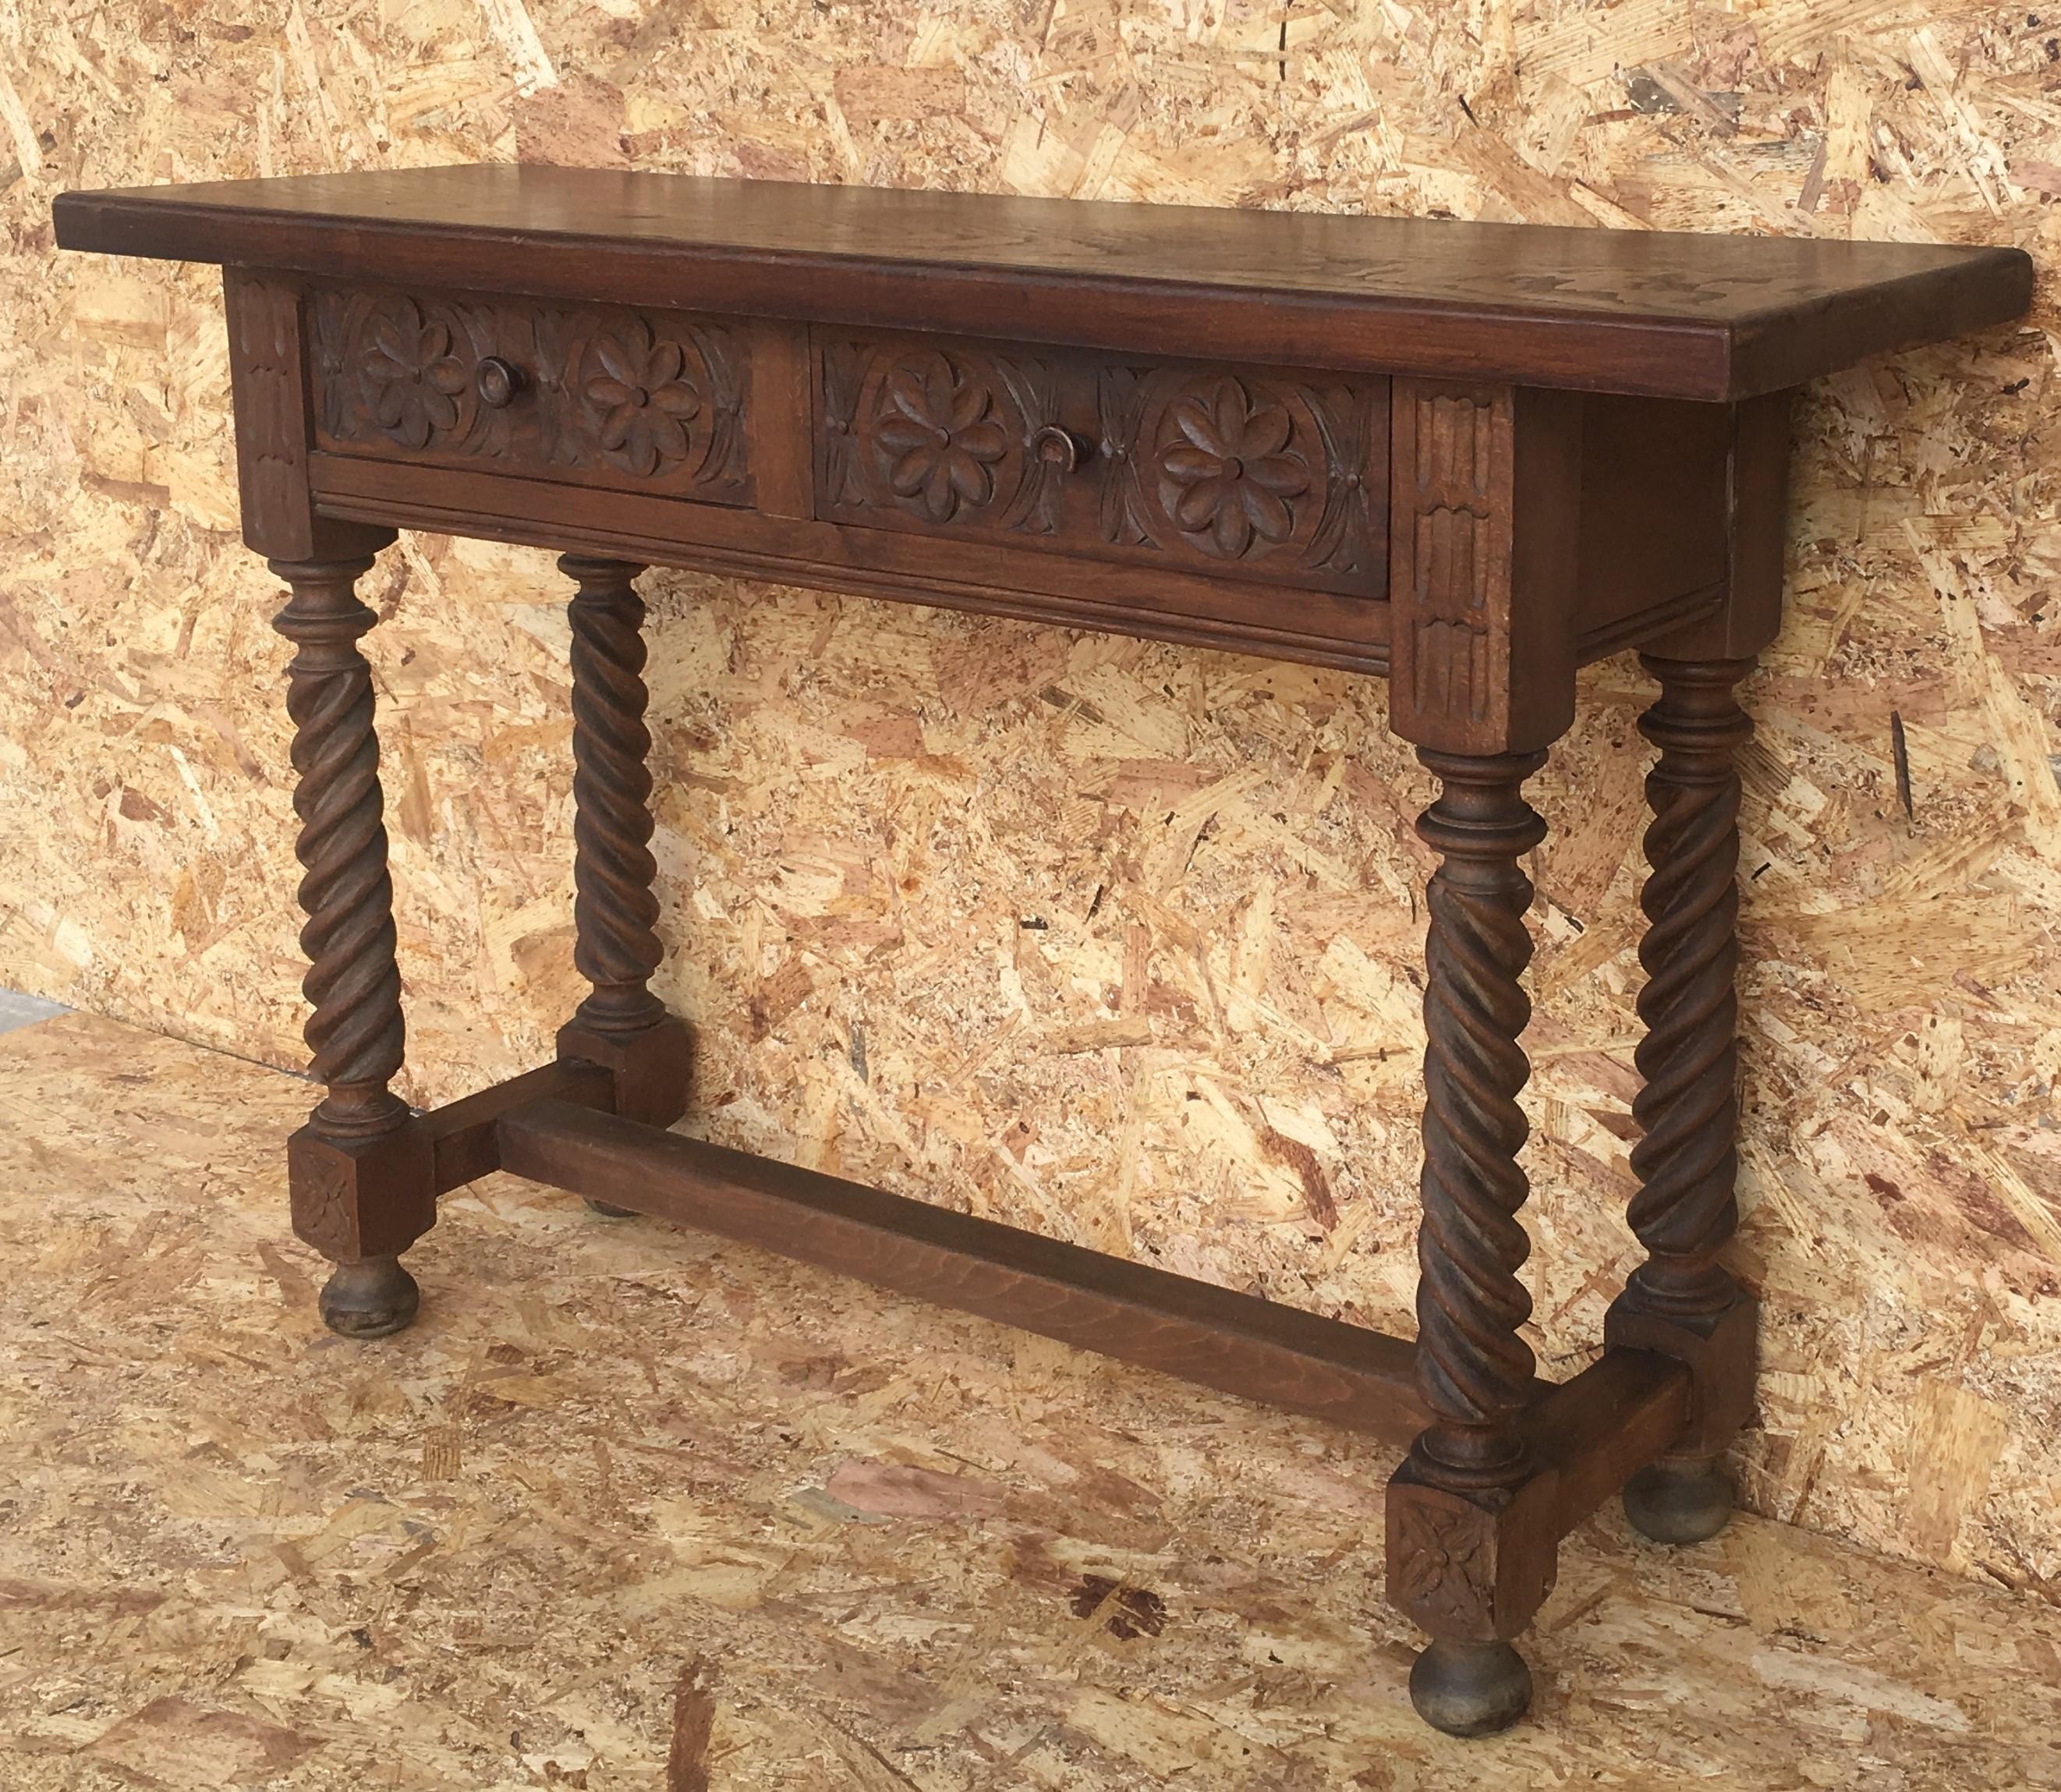 Spanish baroque carved walnut console table with two drawers, circa 1860.